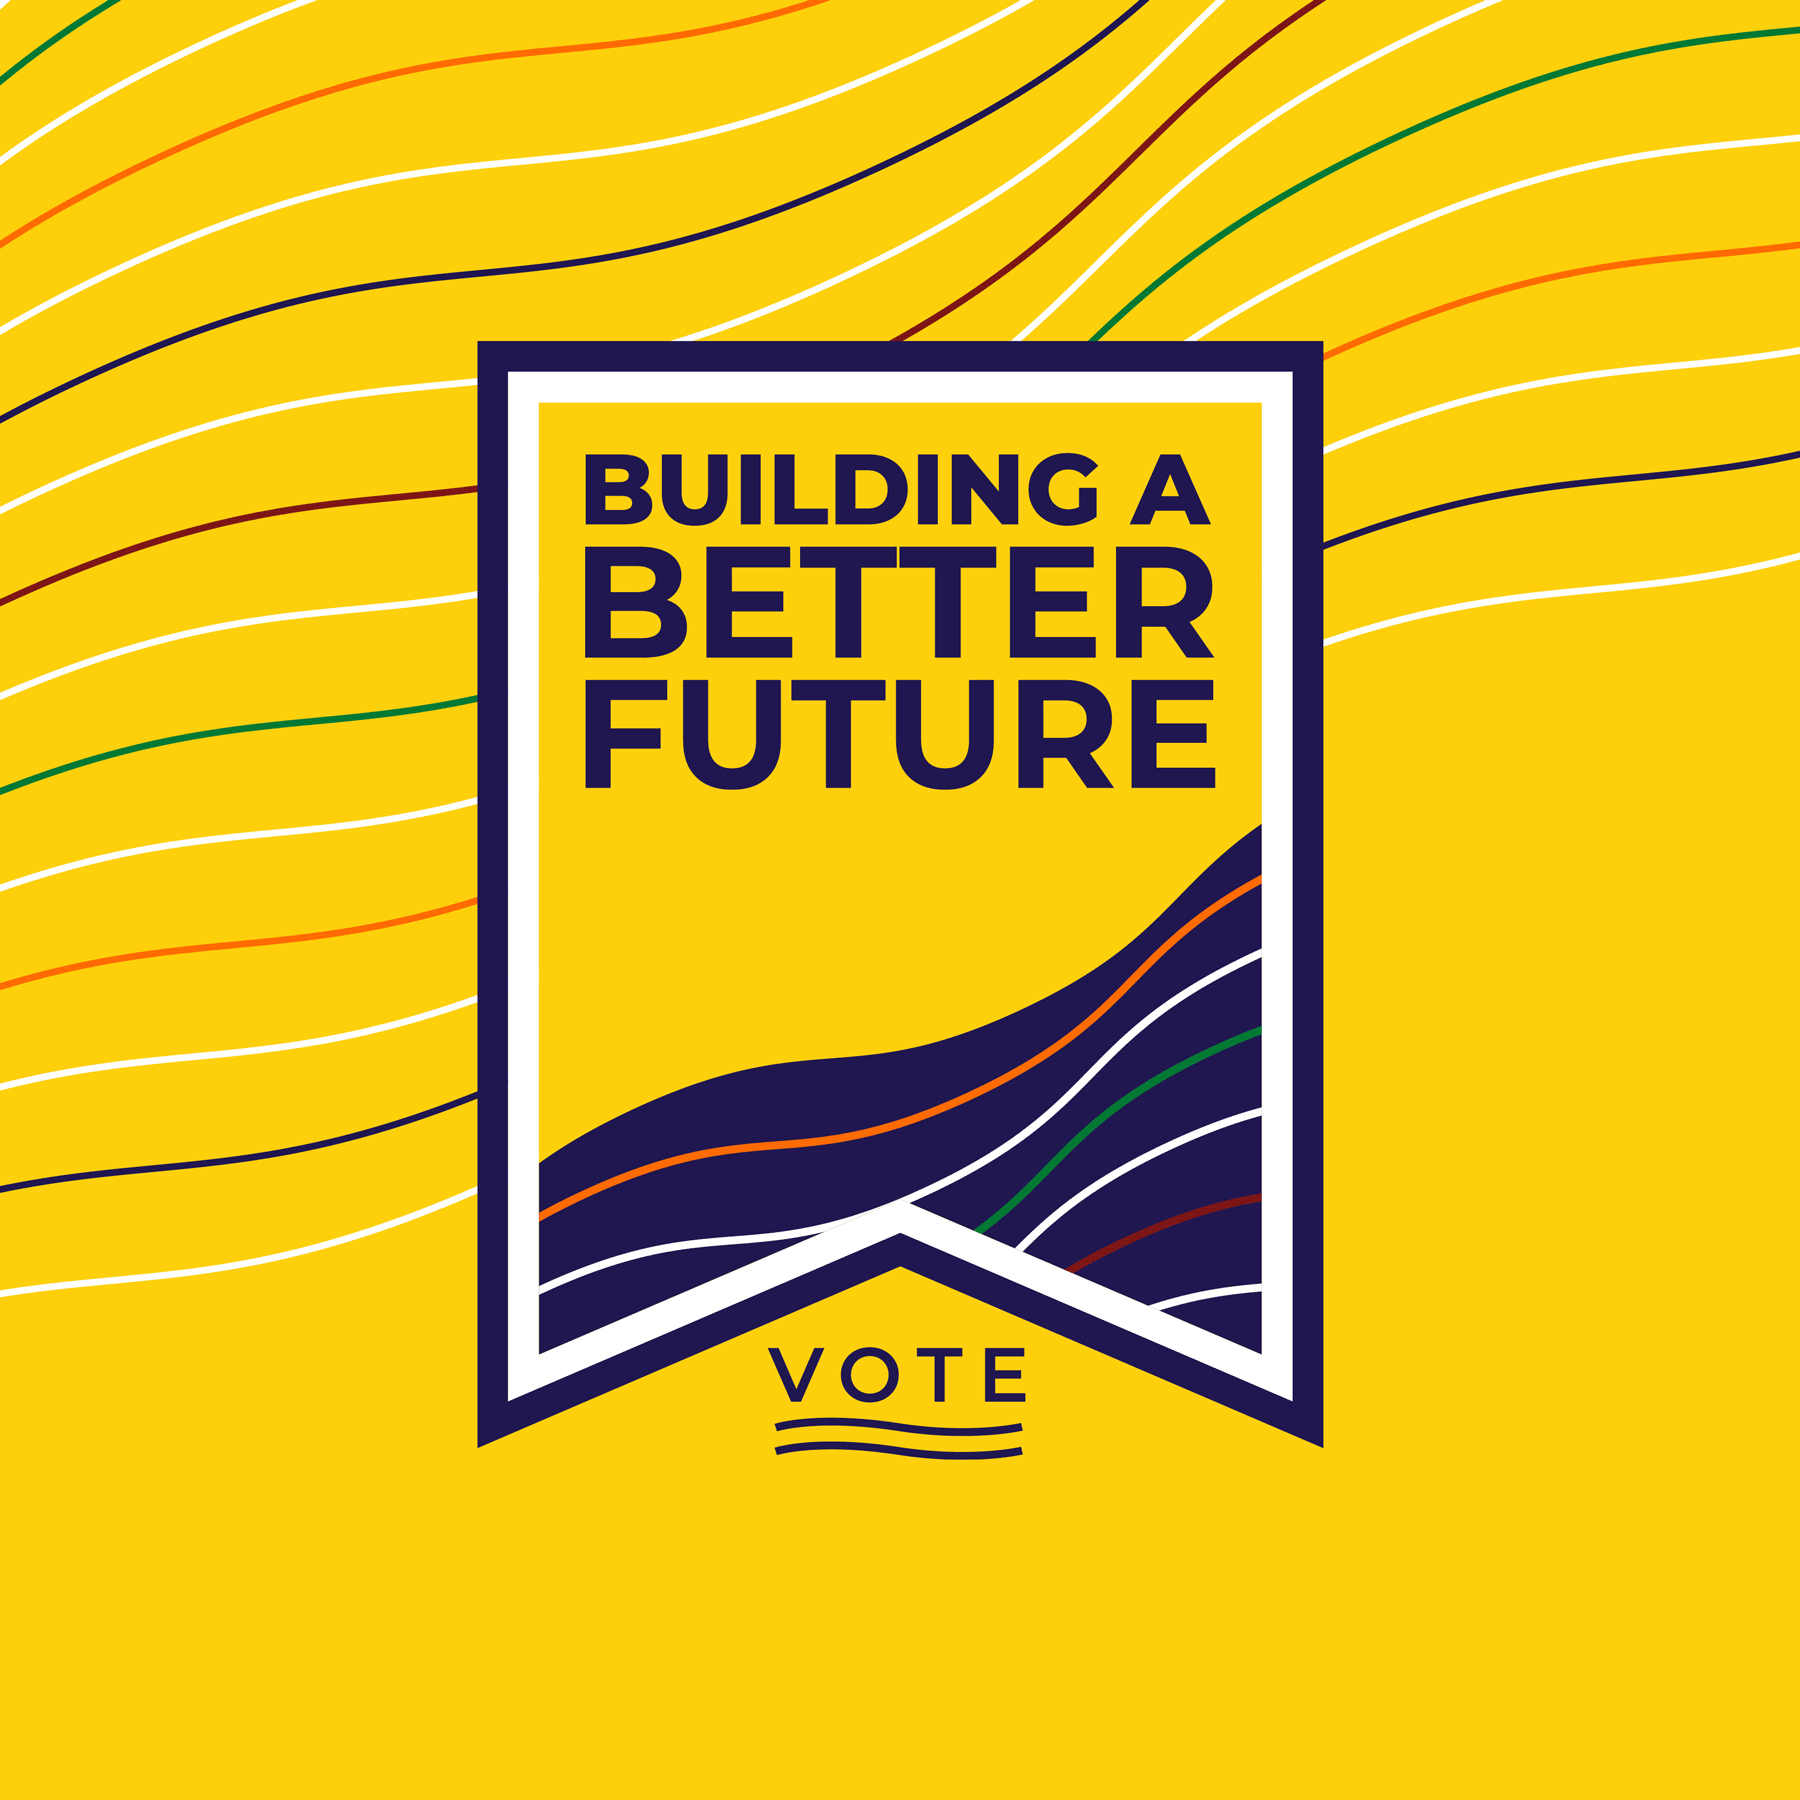 building a better future vote in multiple languages